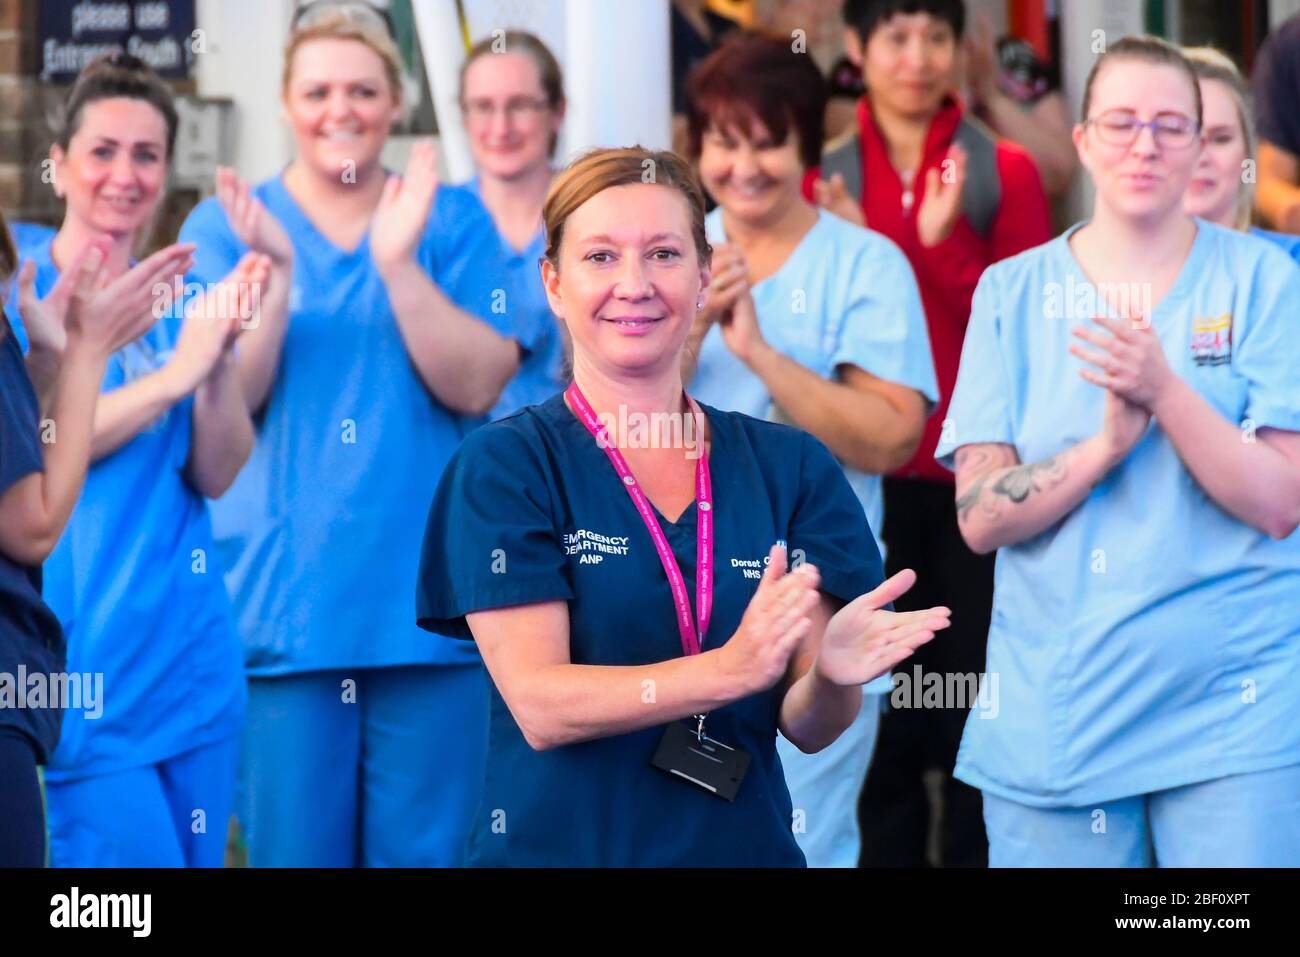 Dorchester, Dorset, UK.  16th April 2020.  Frontline staff including doctors, nurses, police and fire and rescue staff clap for carers, key workers and NHS staff outside the entrance to the A&E department at Dorset County Hospital at Dorchester in Dorset during the coronavirus pandemic lockdown.  Picture Credit: Graham Hunt/Alamy Live News Stock Photo